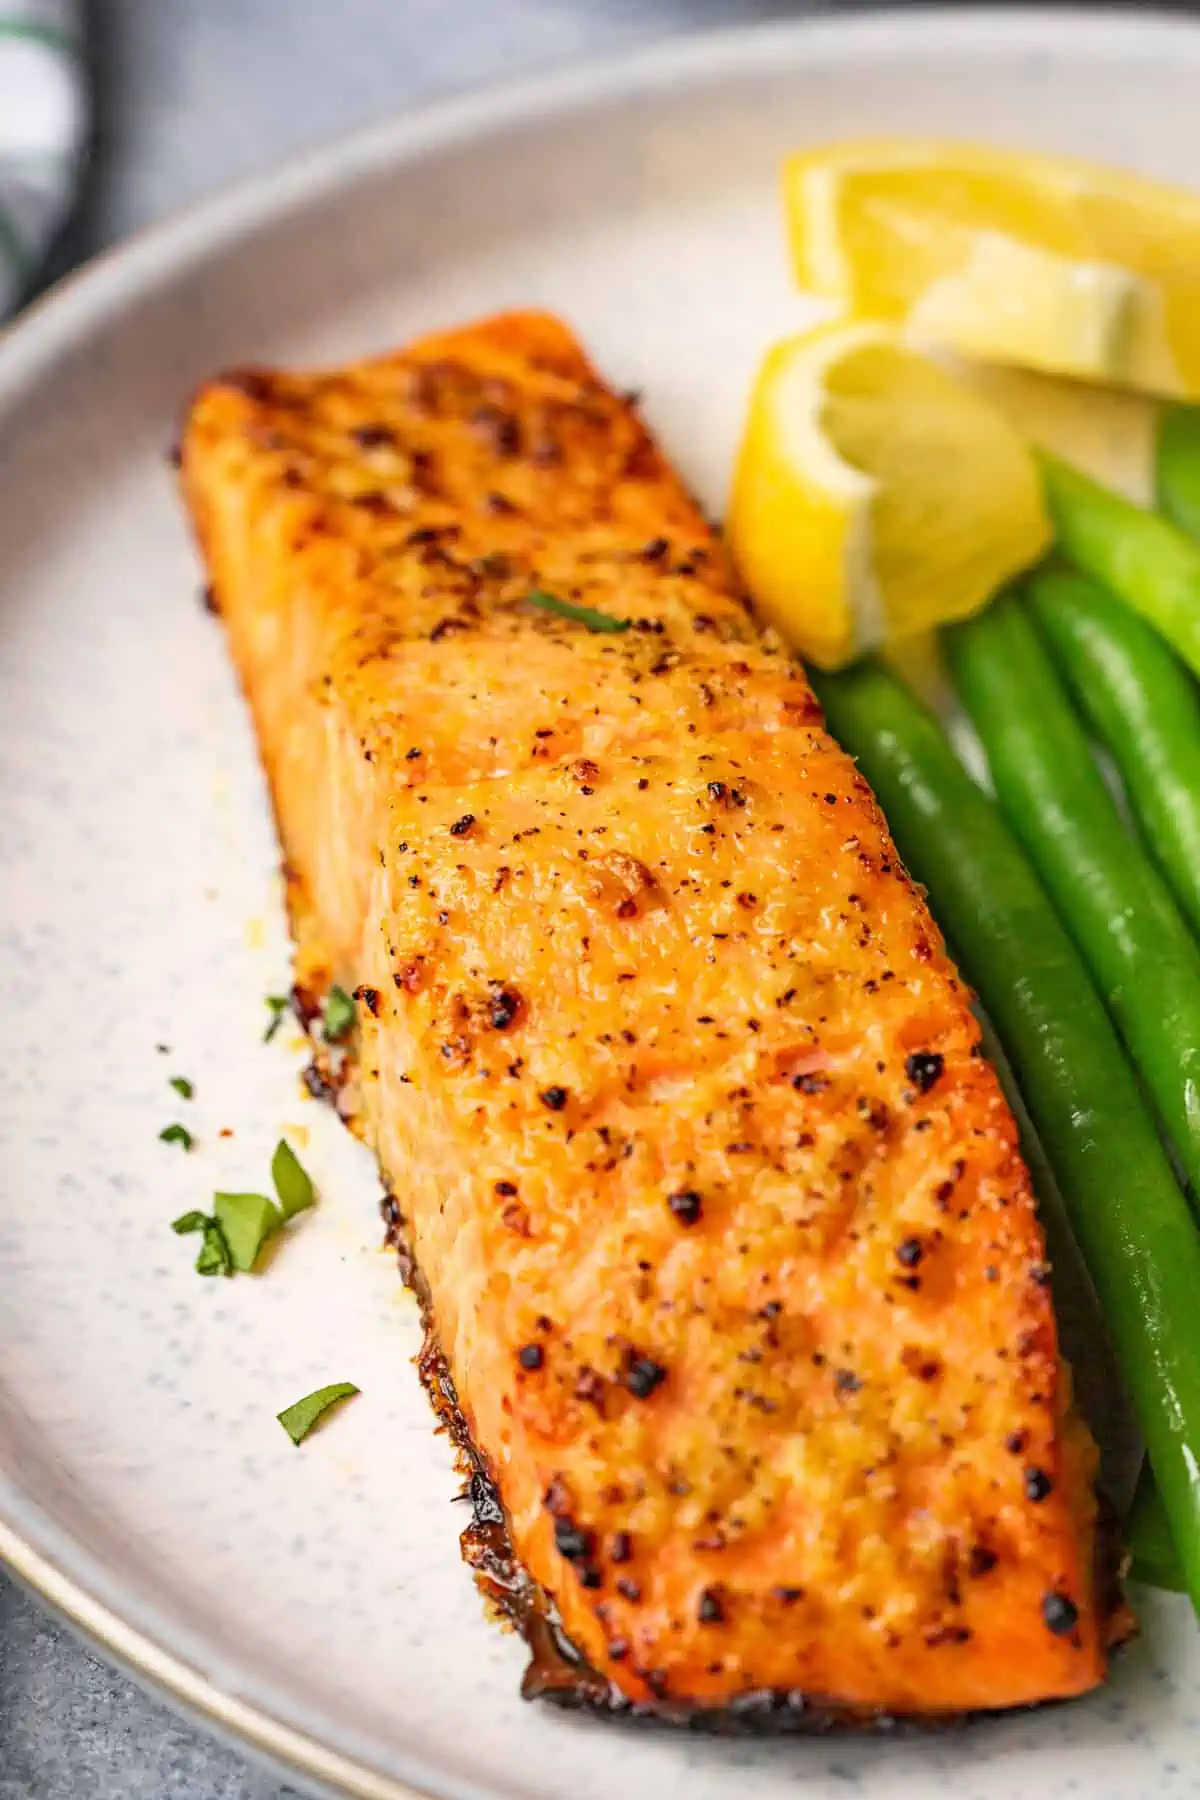  Salmon served with green beans and lemon.